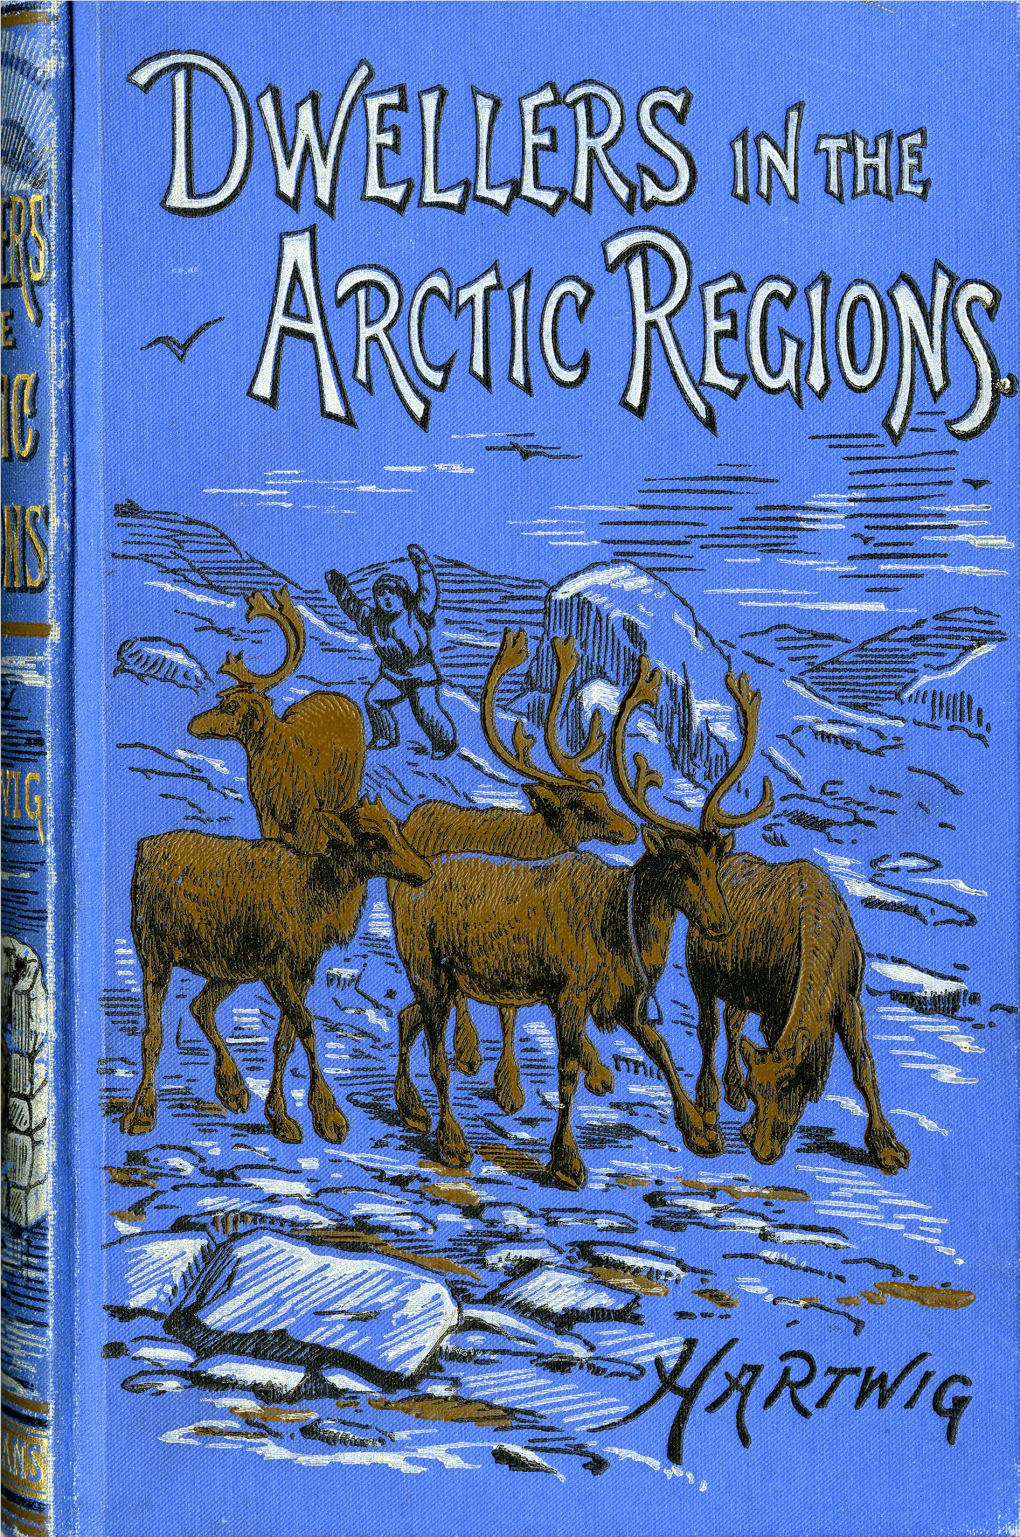 DWELLERS in the ARCTIC REGIONS. WALRUS Hllntino, DWELJJERS in the ARCTIC REGIONS